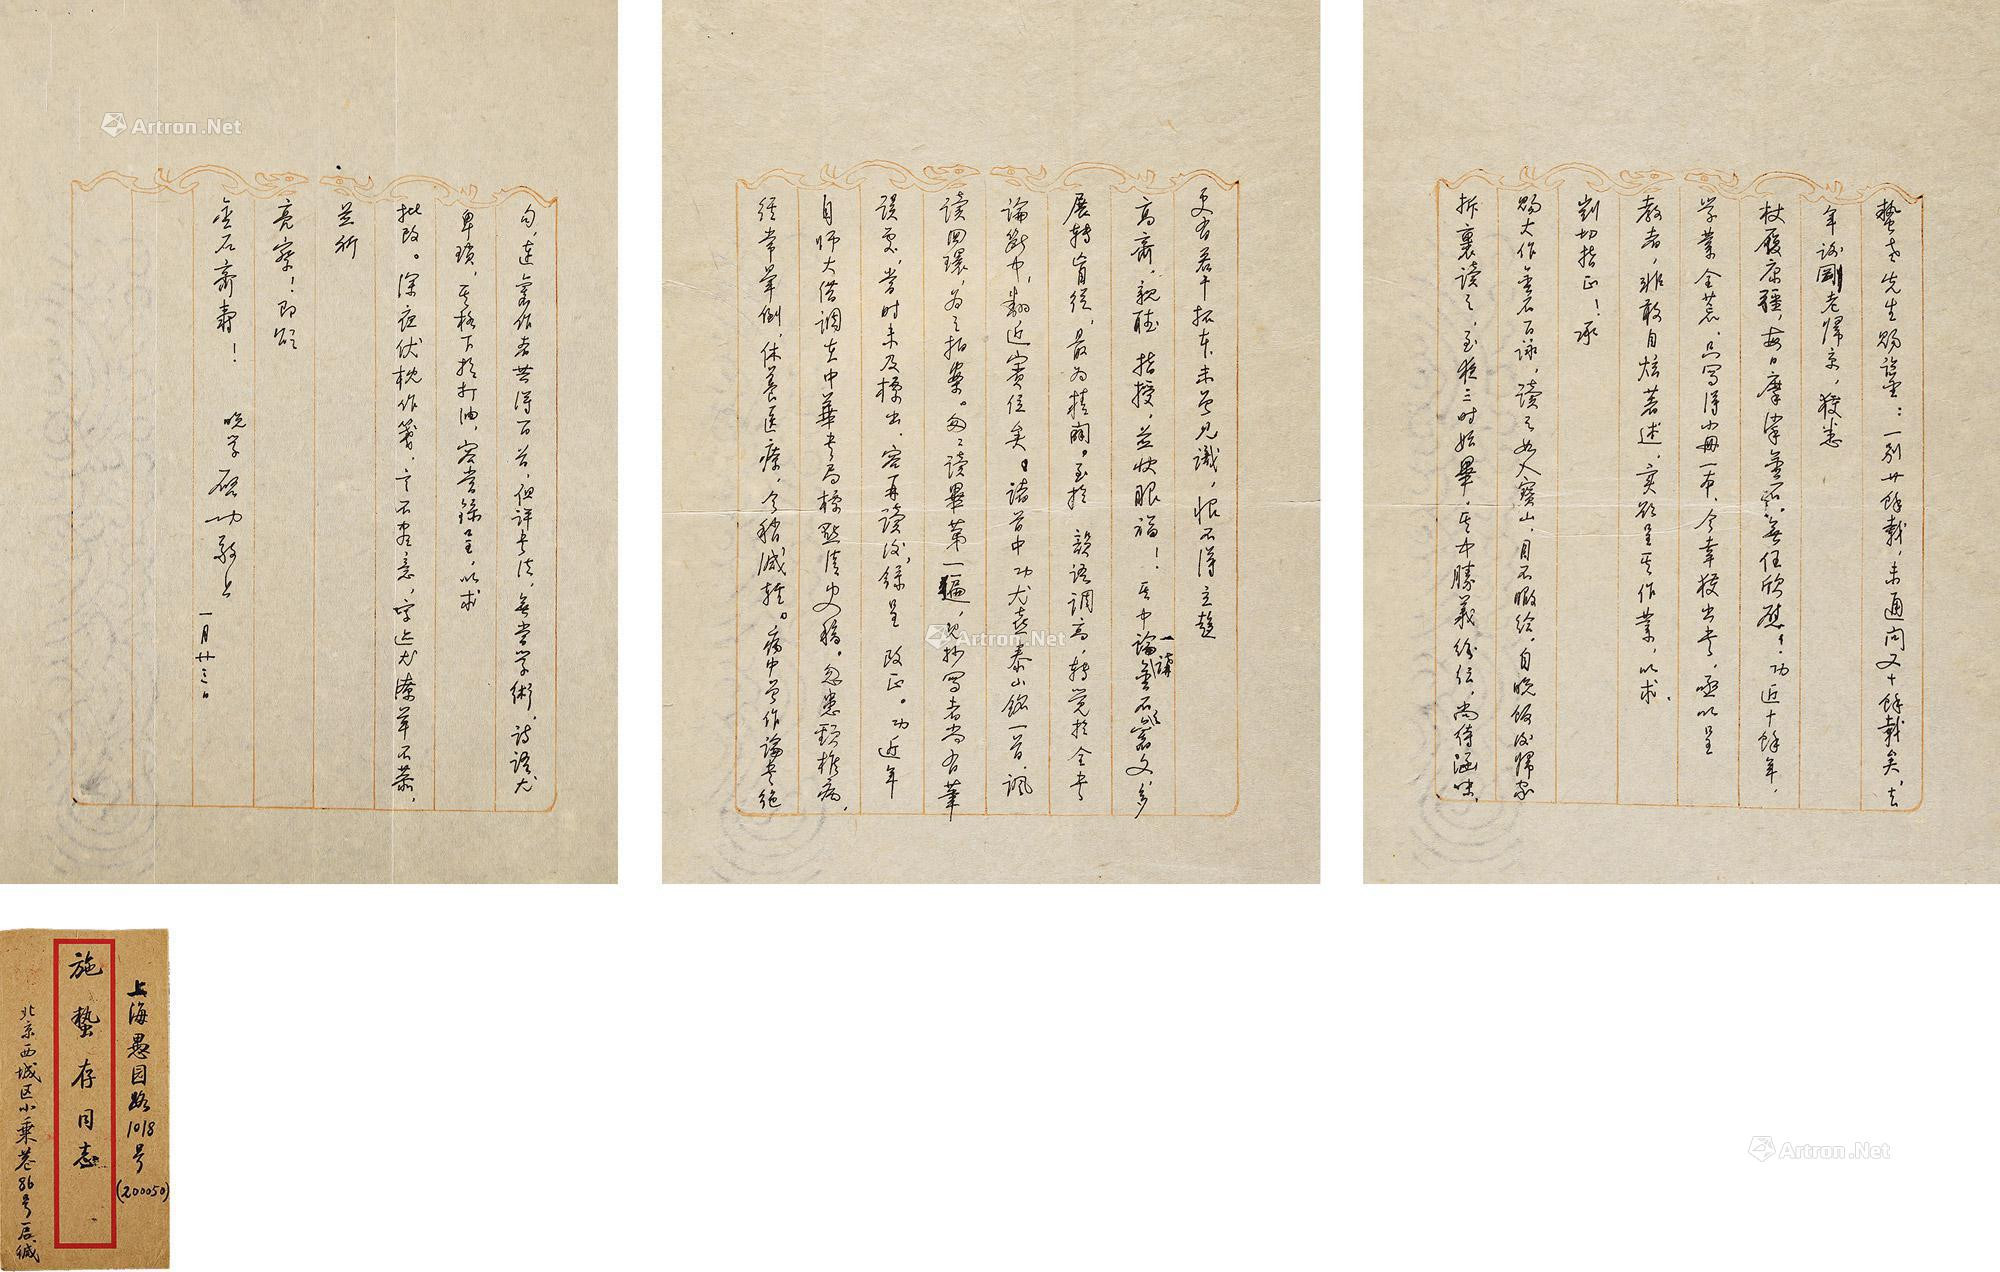 Letter of three pages by Qigong to Shi Zhecun Caused， with original cover